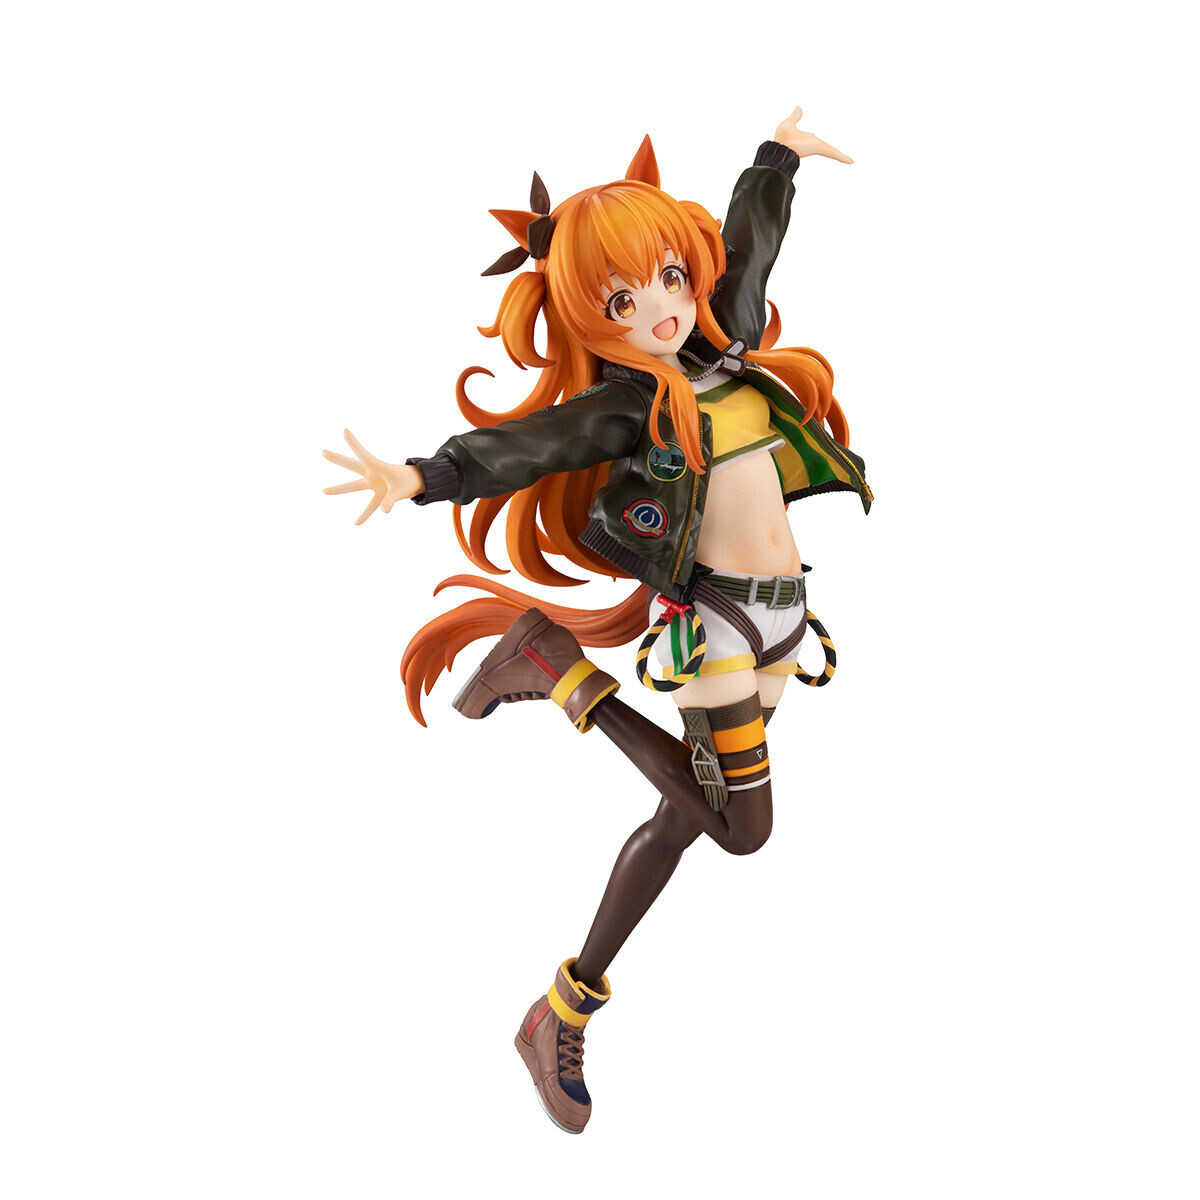 Primary image for MegaHouse Mayano Top Gun Figure 